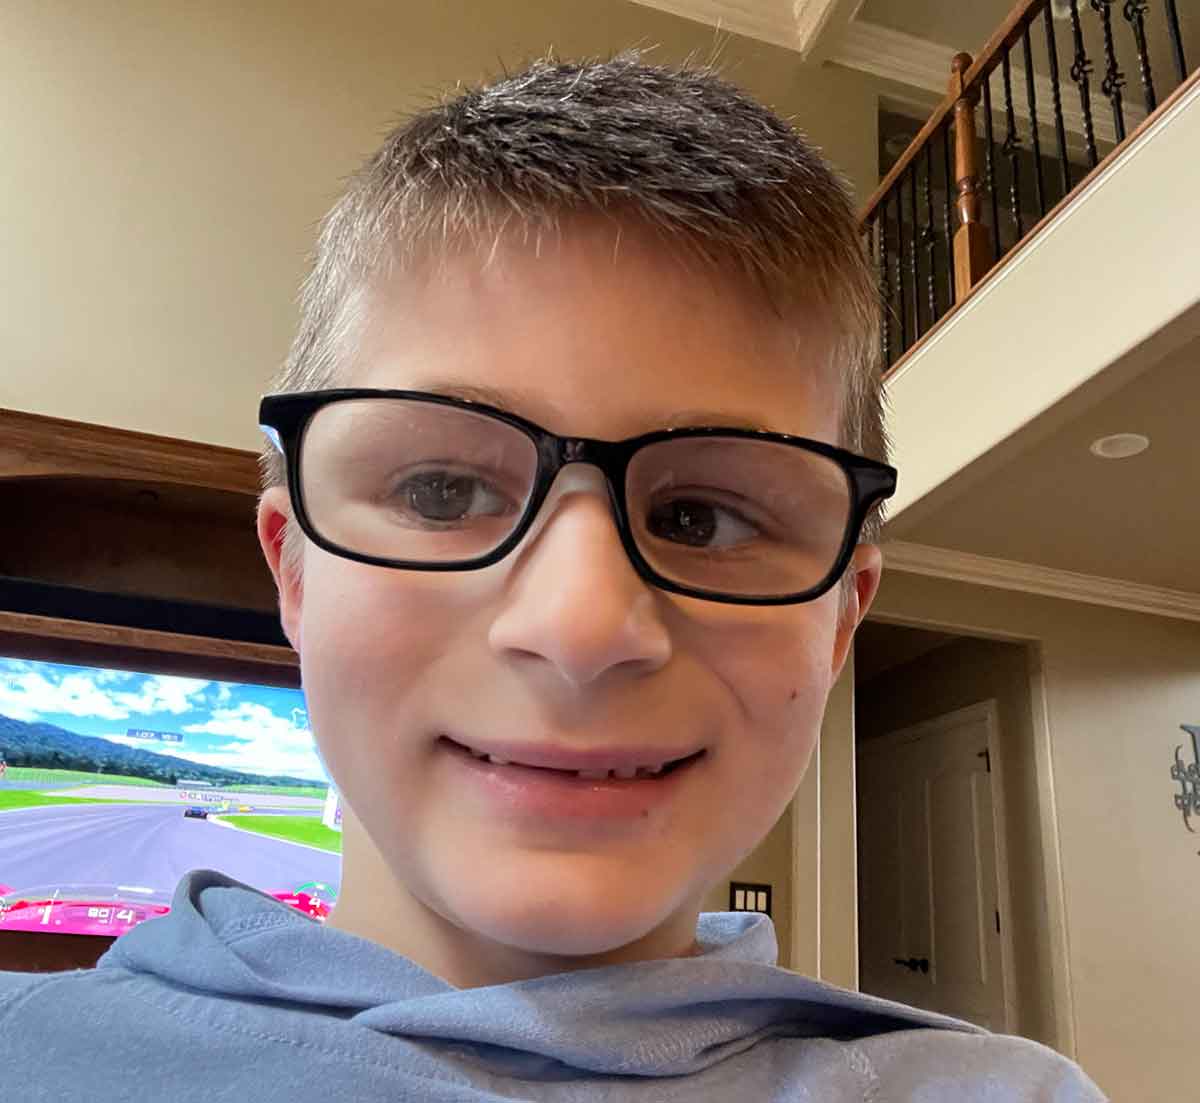 Little boy in black glasses taking a selfie with a TV and upstairs railing in the background.